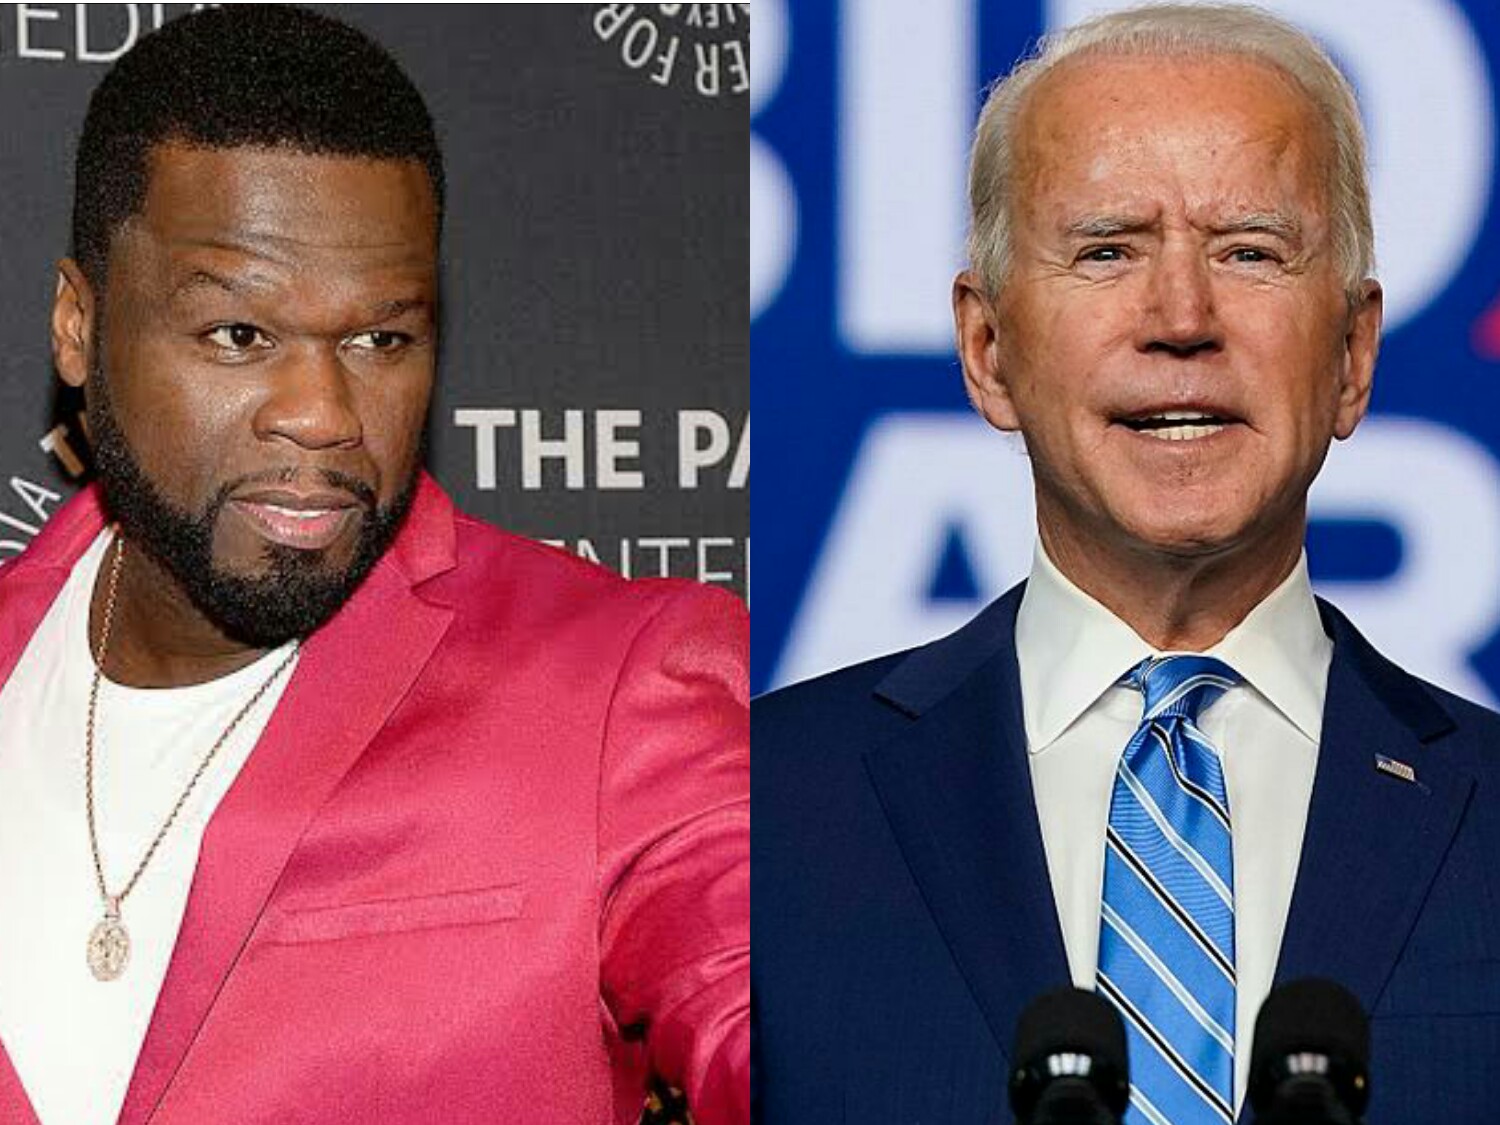 50 Cent Don’t Want To Troll Joe Biden, It’s Too Early